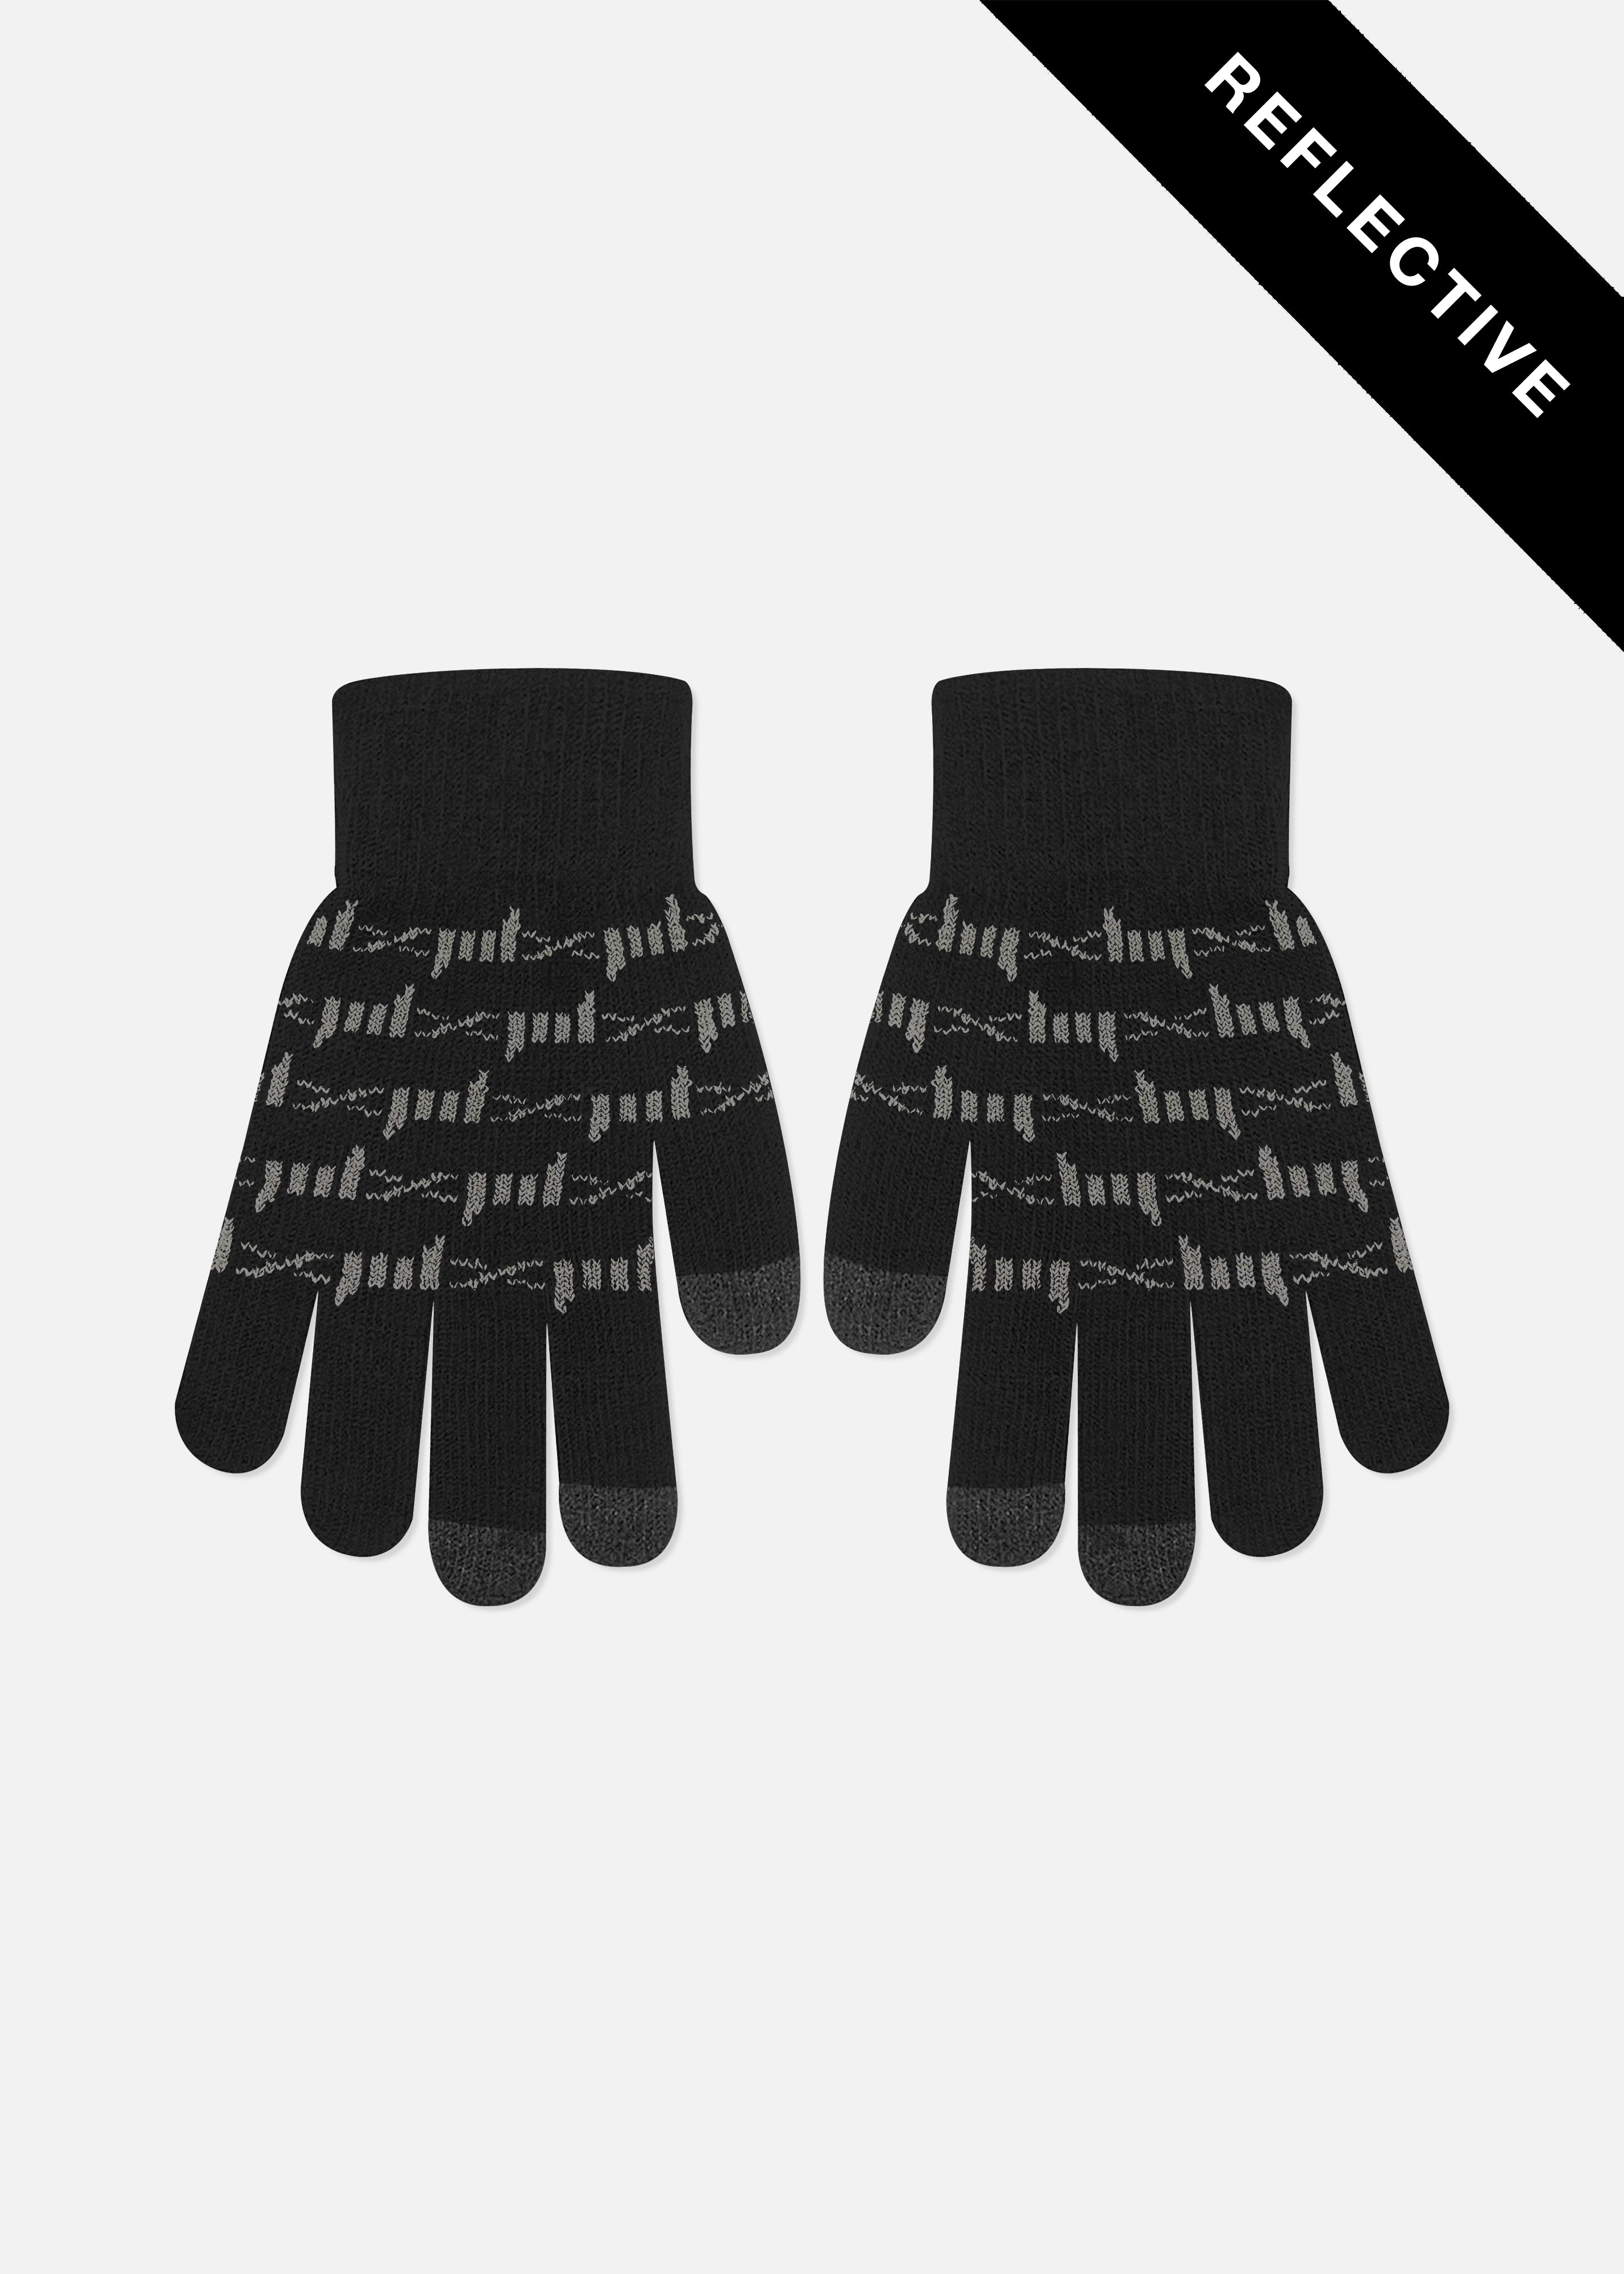 Image of Reflective Barbed Wire Gloves  Black